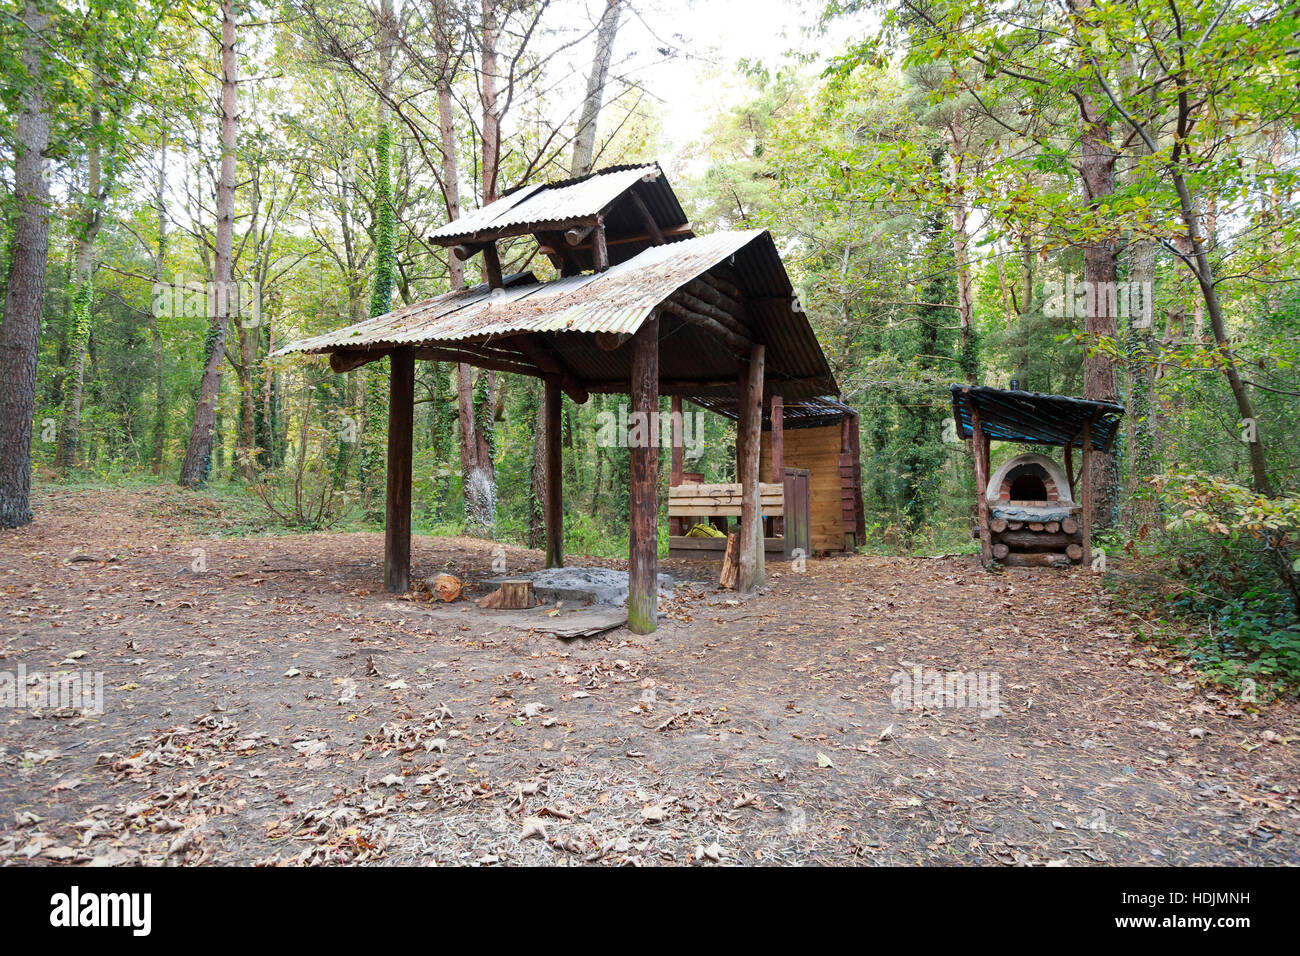 hand built oven and shelter in woodland camp Stock Photo